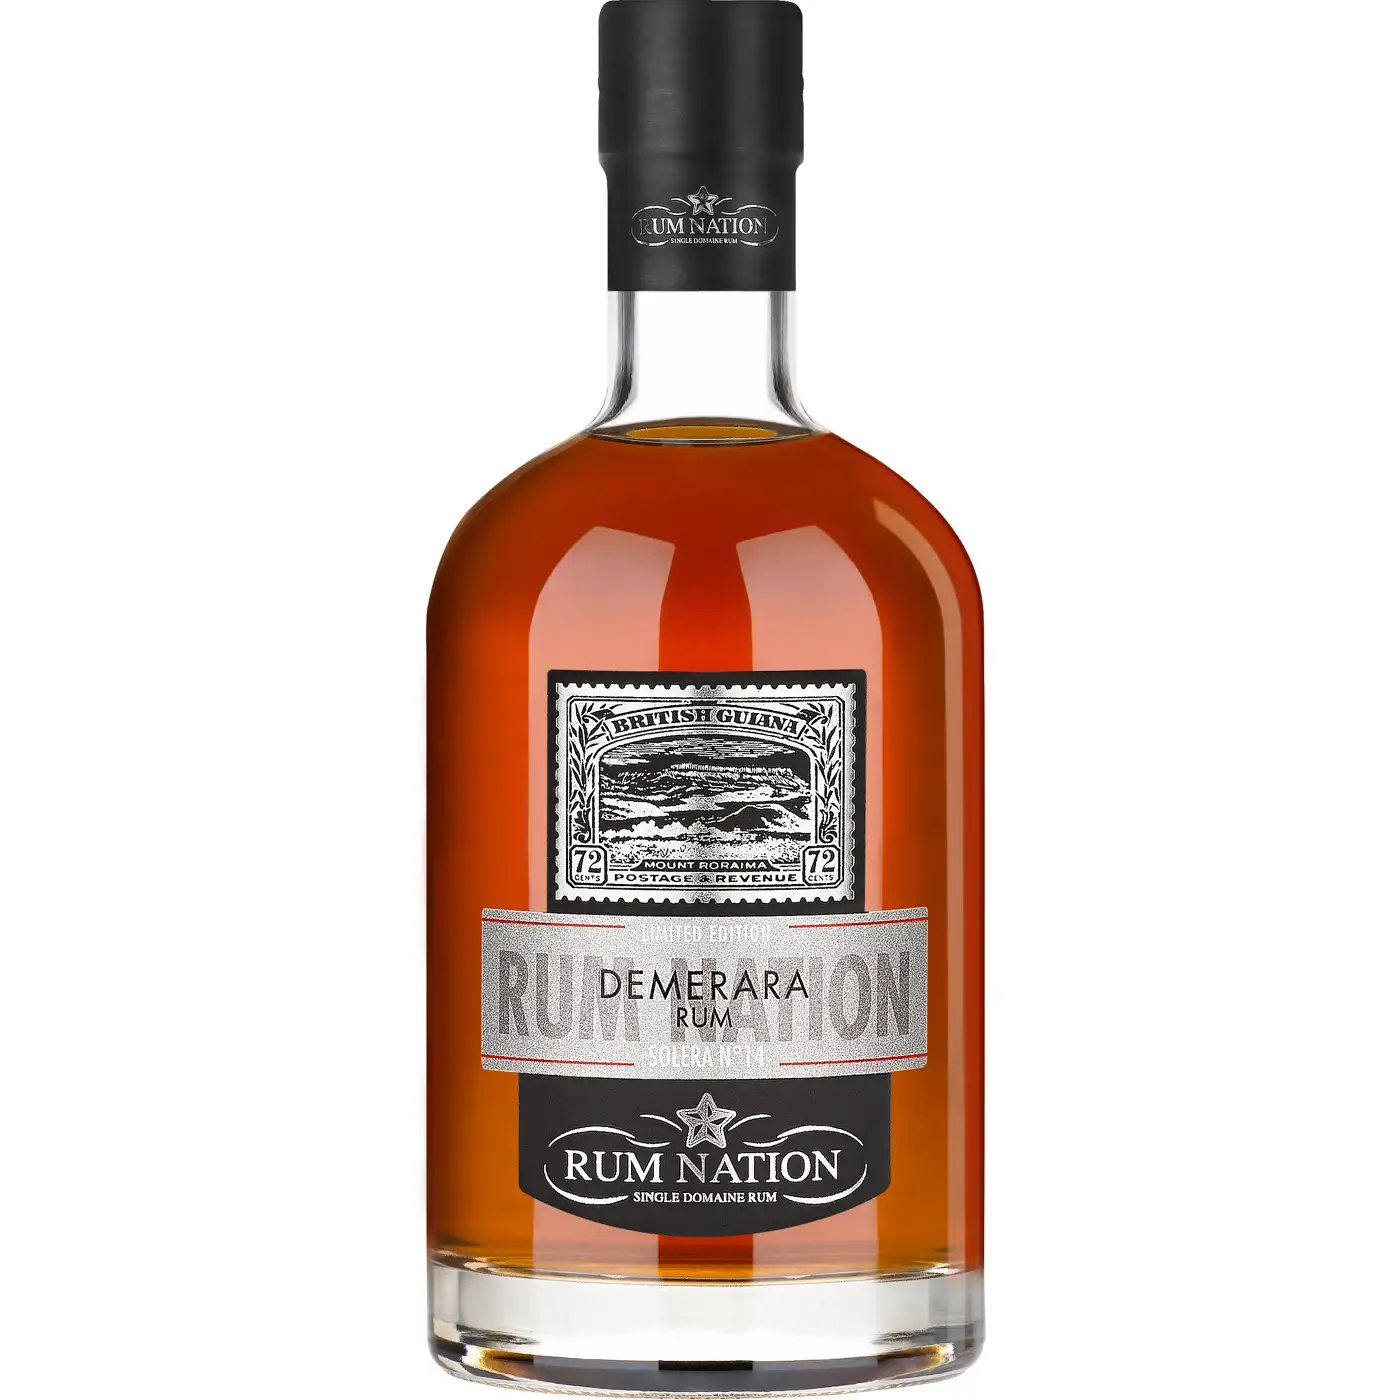 Image of the front of the bottle of the rum Demerara Rum Solera No. 14 2016